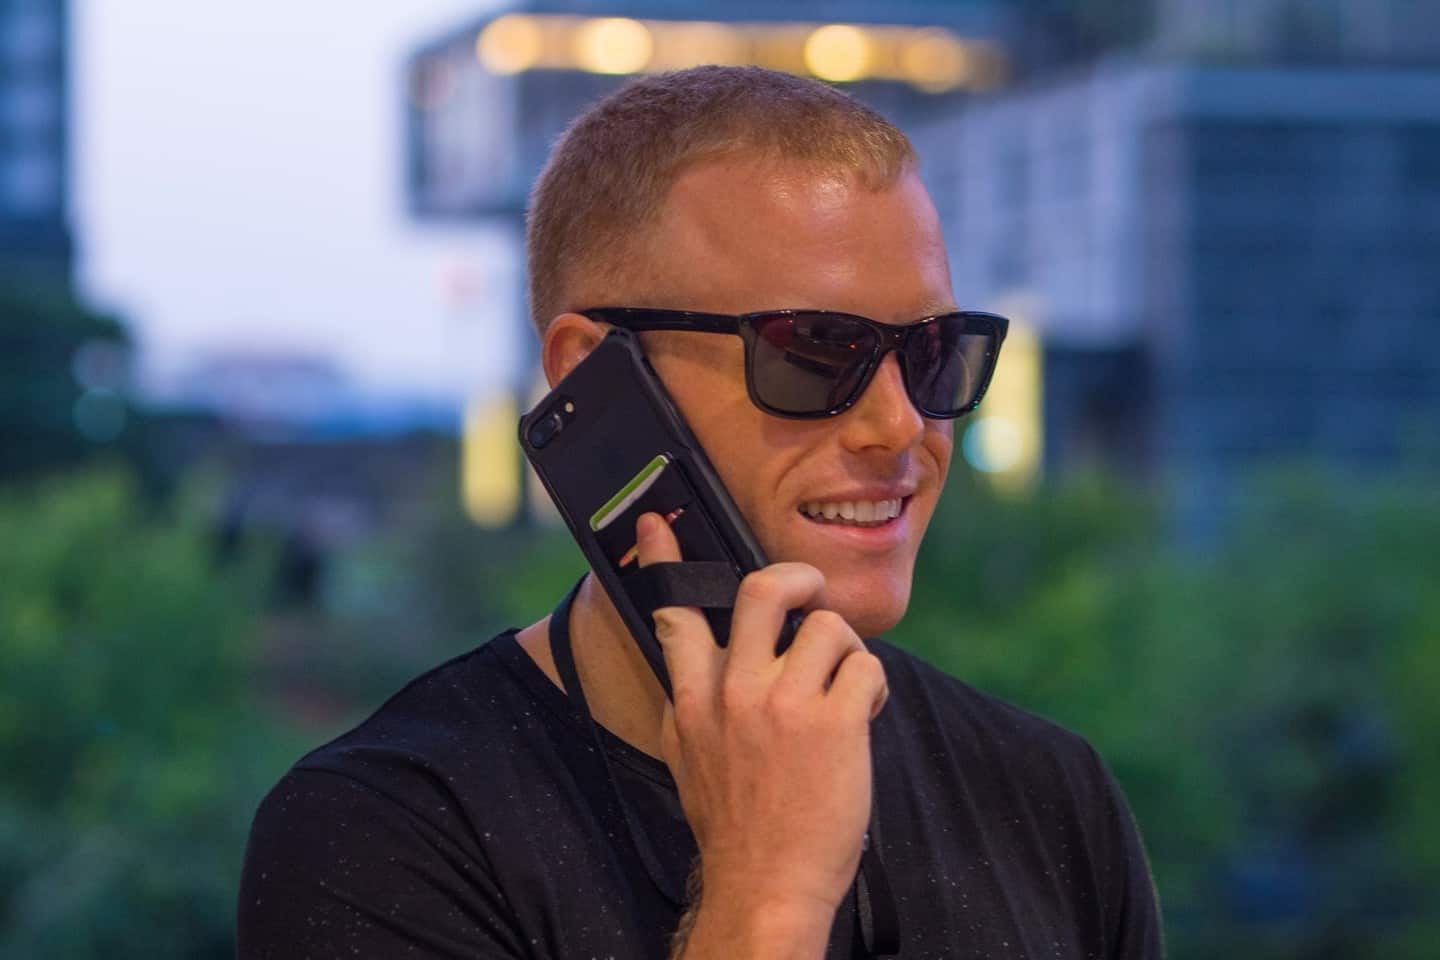 Mobile Phone With The Sticky Wallet